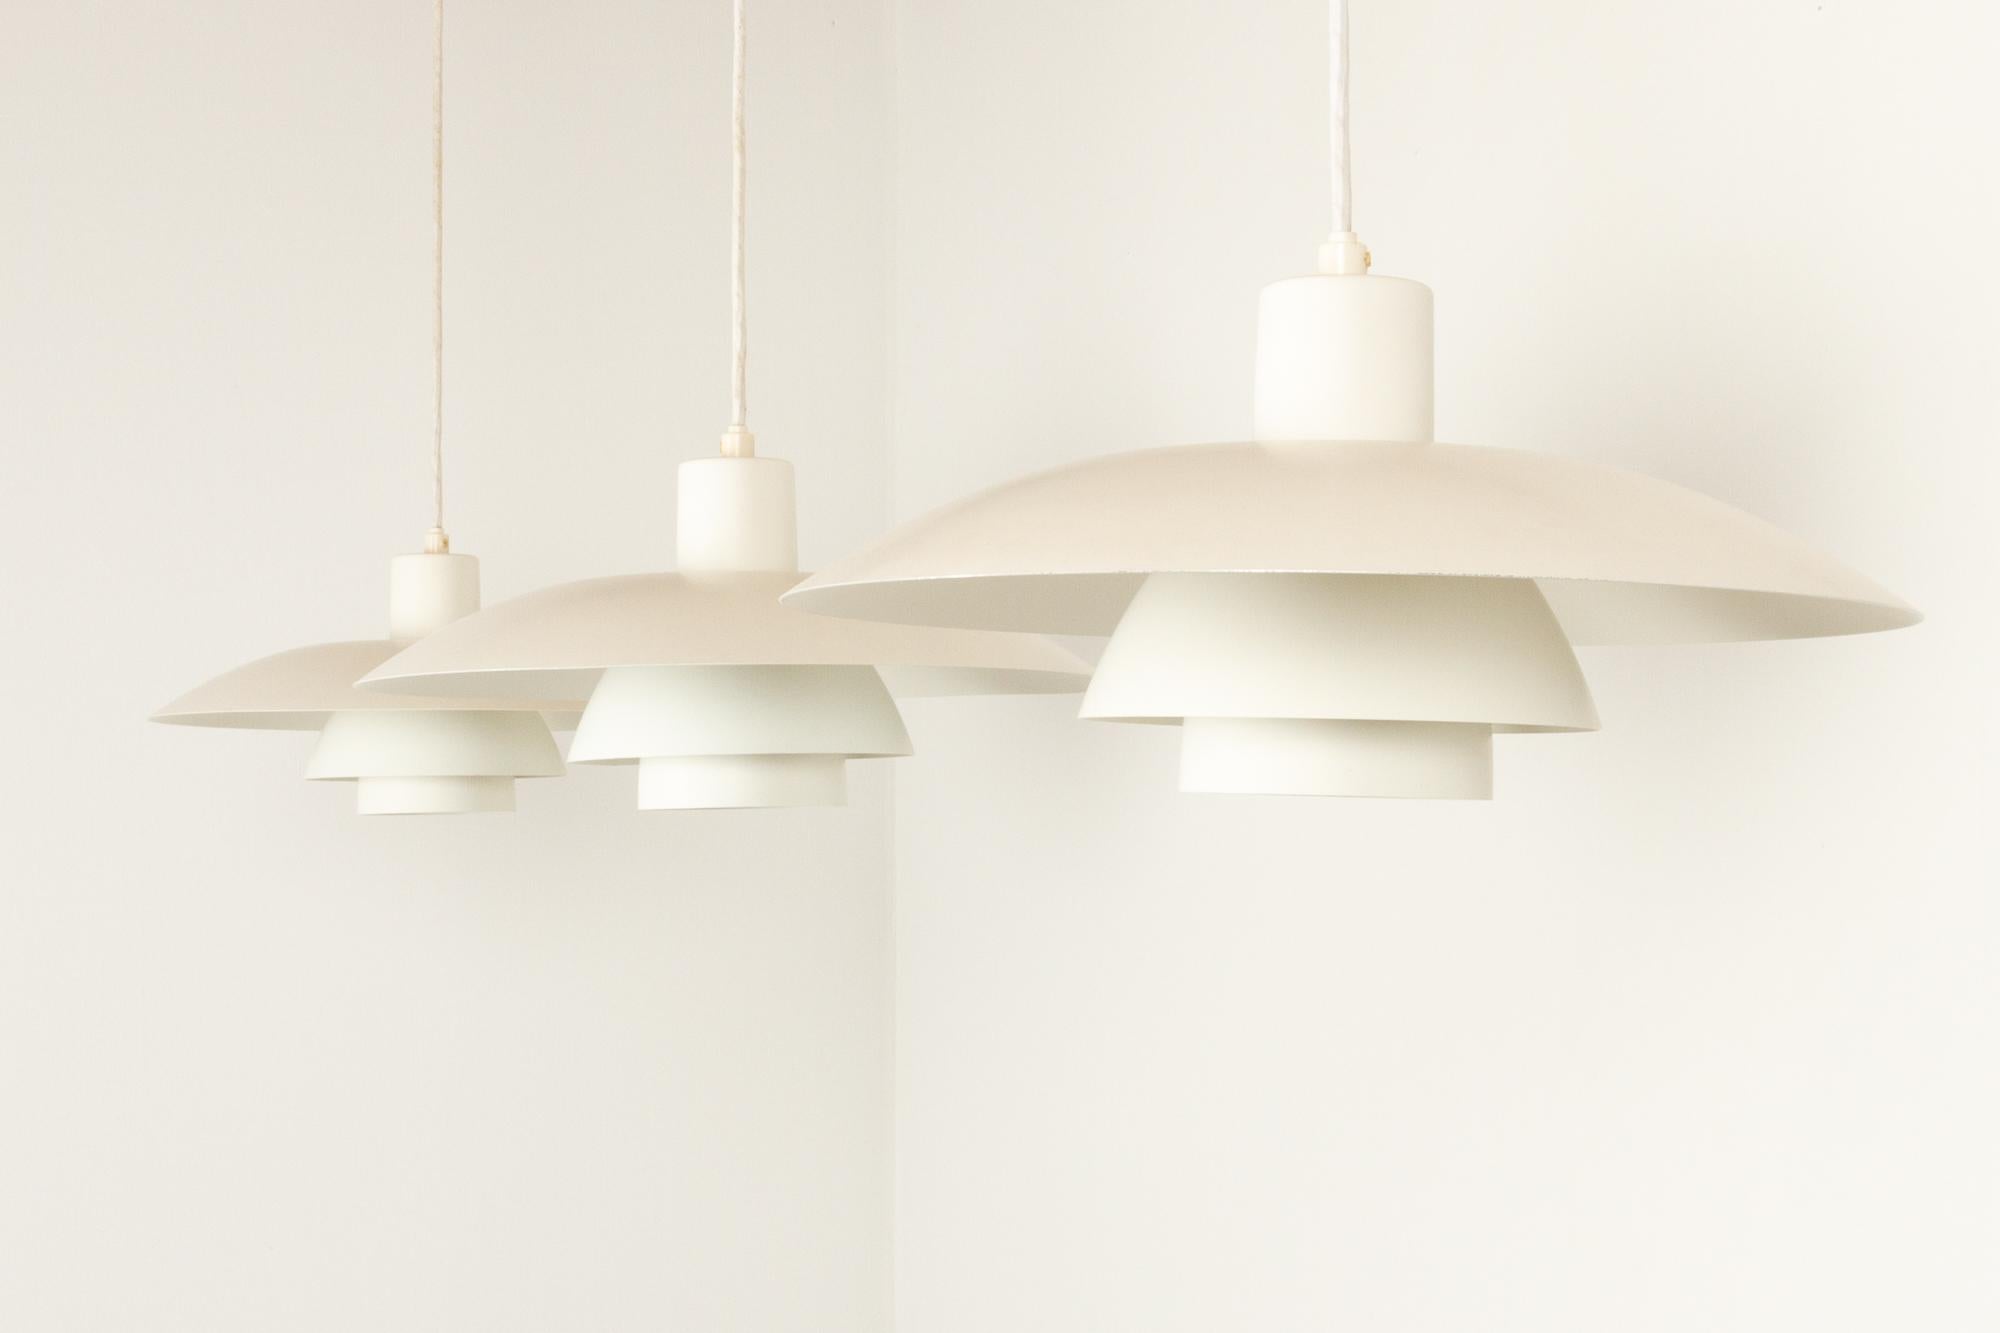 Vintage PH 4/3 pendants by Poul Henningsen for Louis Poulsen 1970s, set of 3

Set of three white Danish modern PH4 ceiling pendants with three shades. A true Mid-Century Modern lighting design Classic.

This lamp is a simplified model of a lamp